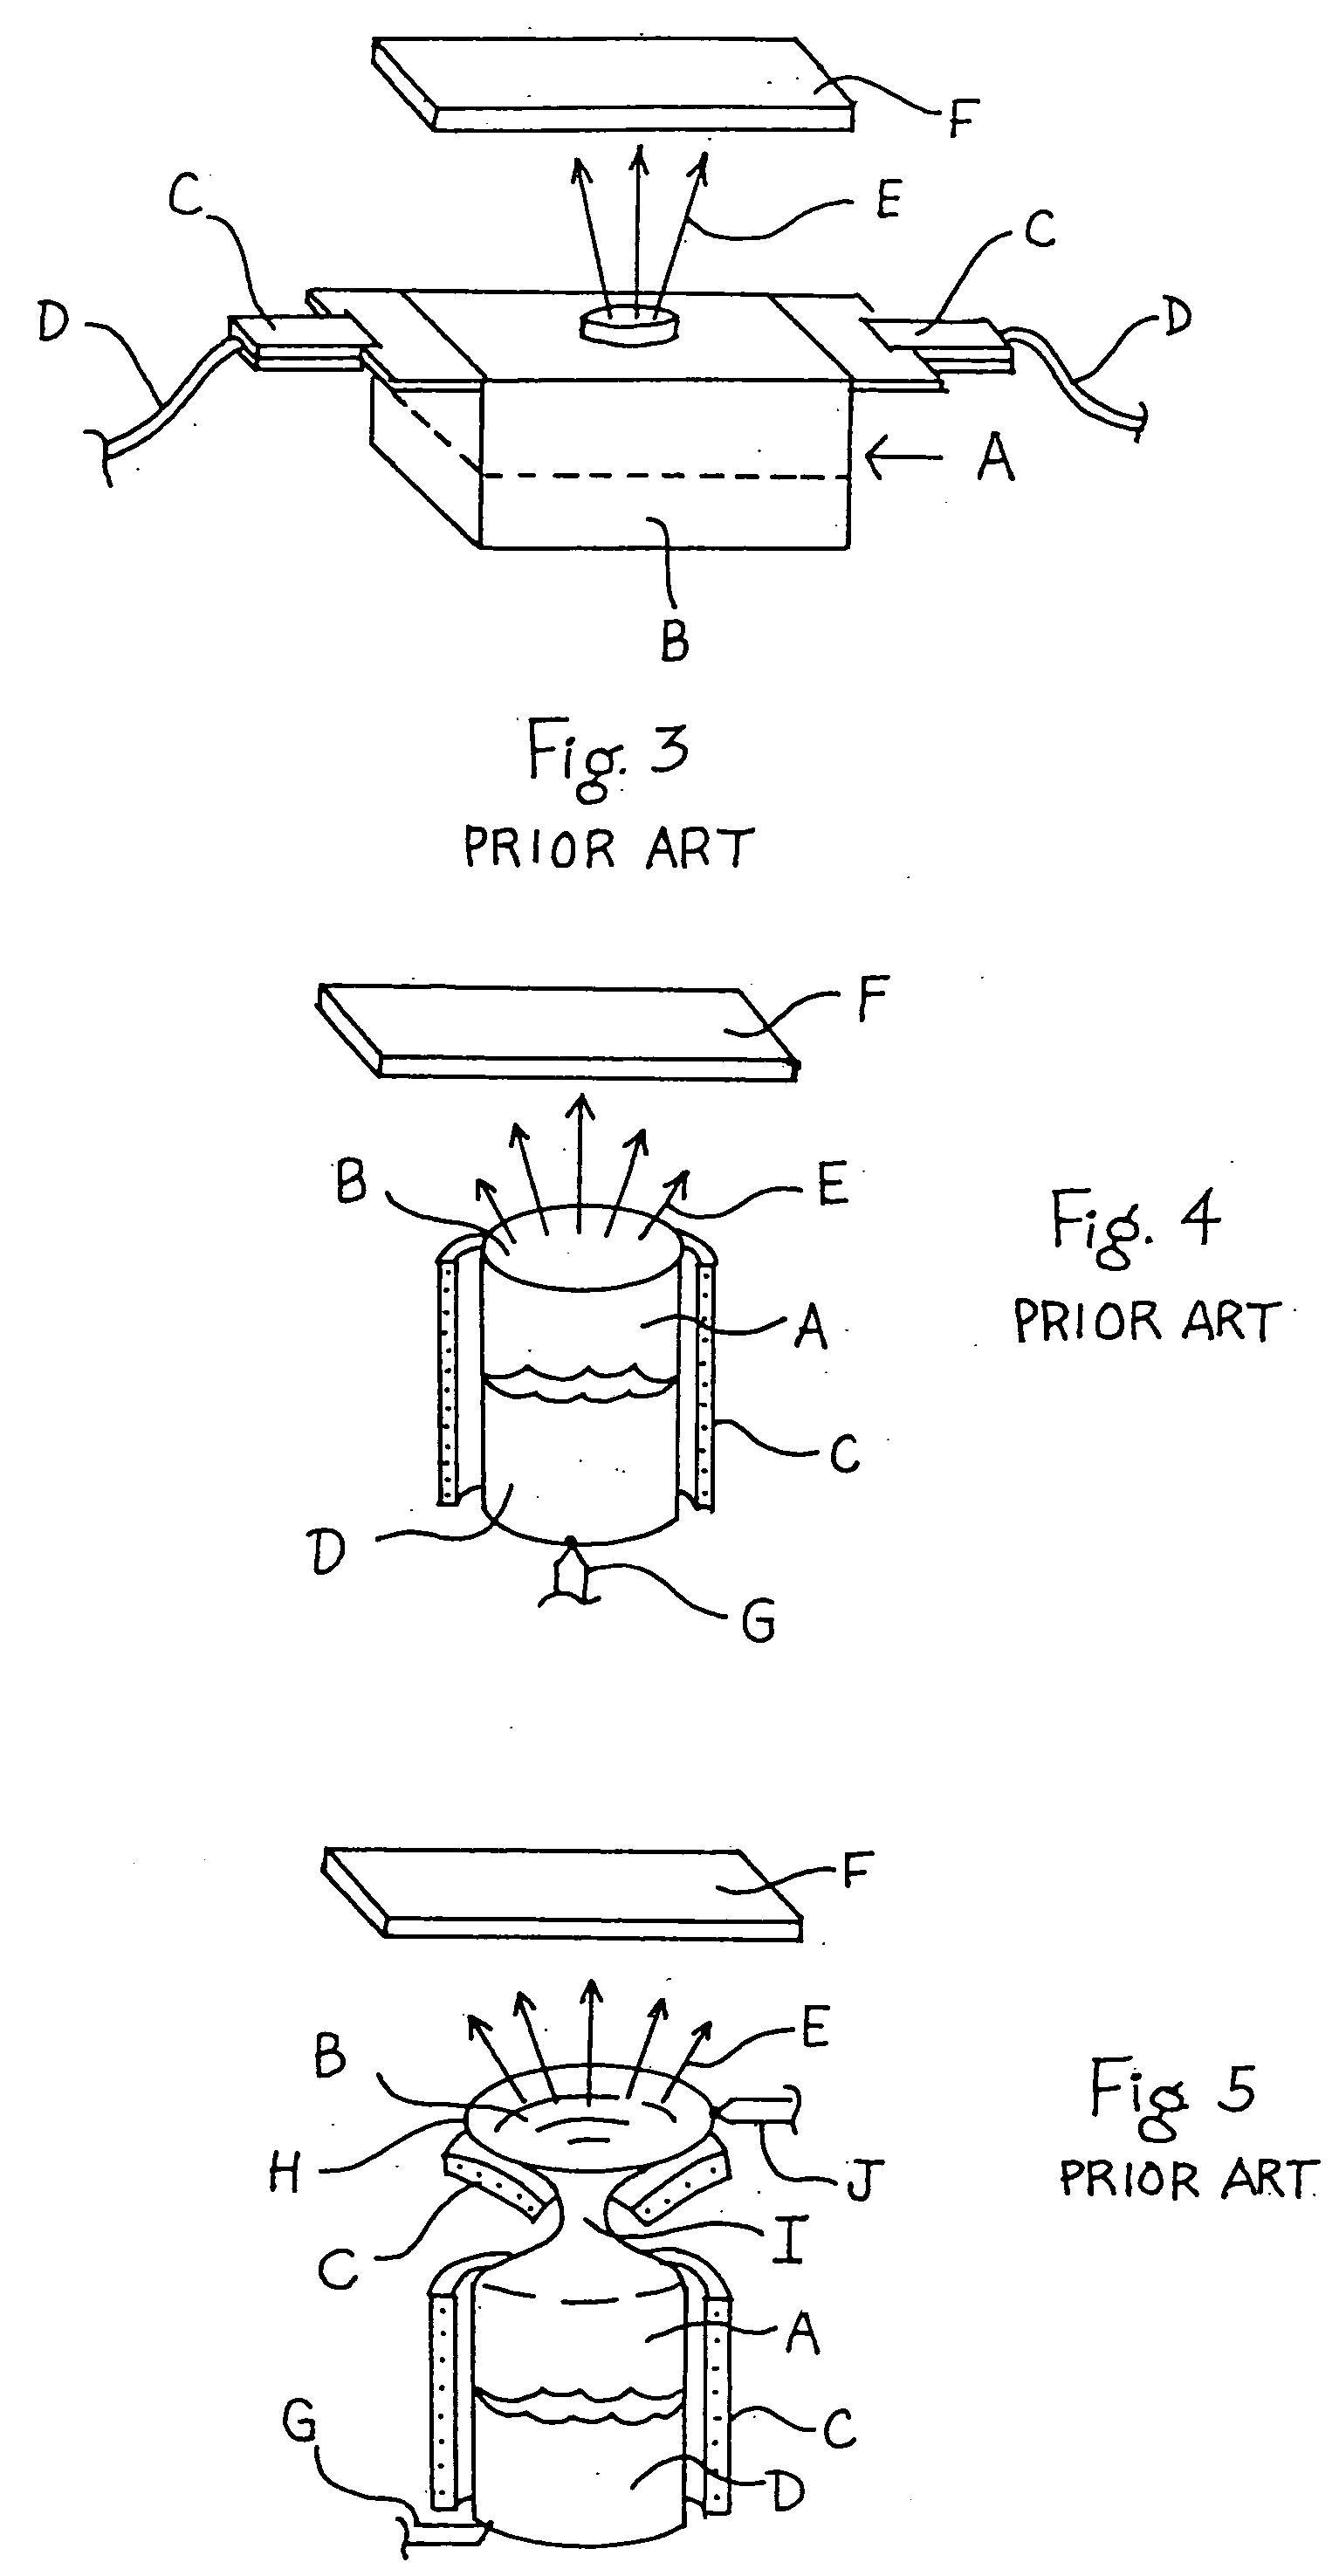 Material deposition system and a method for coating a substrate or thermally processing a material in a vacuum